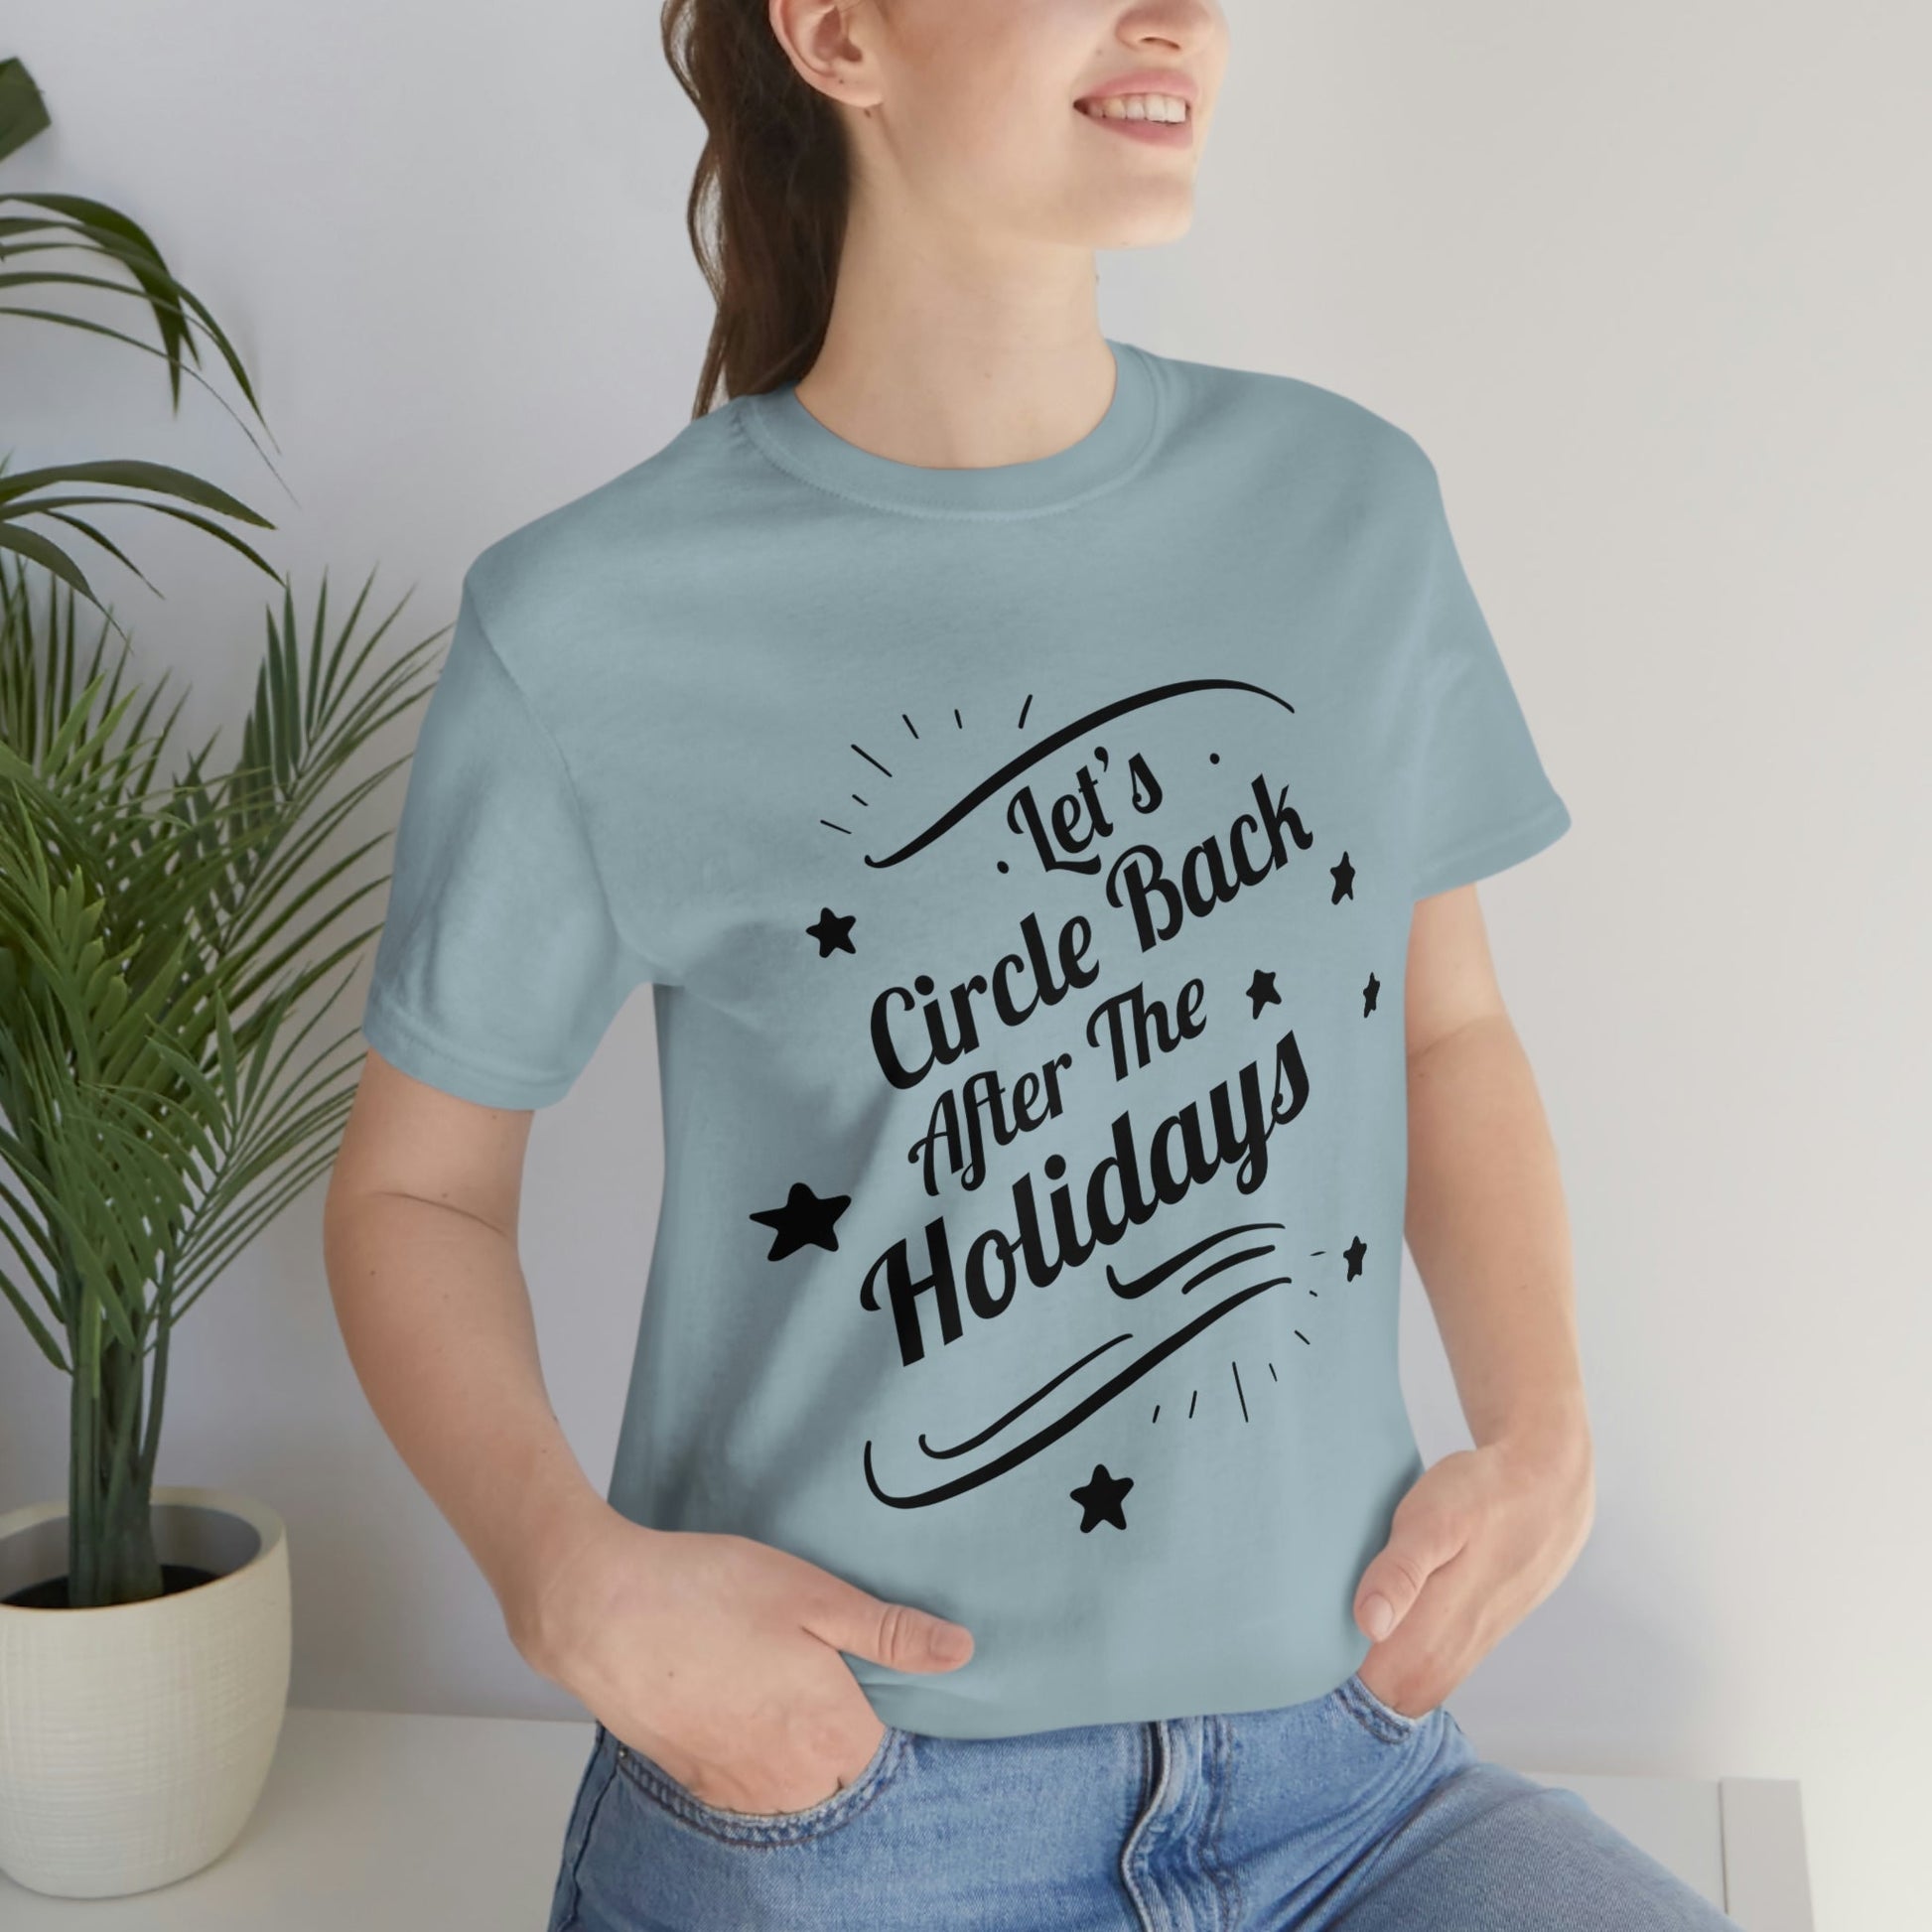 Let`s Circle Back After the Holidays Funny Christmas Quotes Unisex Jersey Short Sleeve T-Shirt Ichaku [Perfect Gifts Selection]